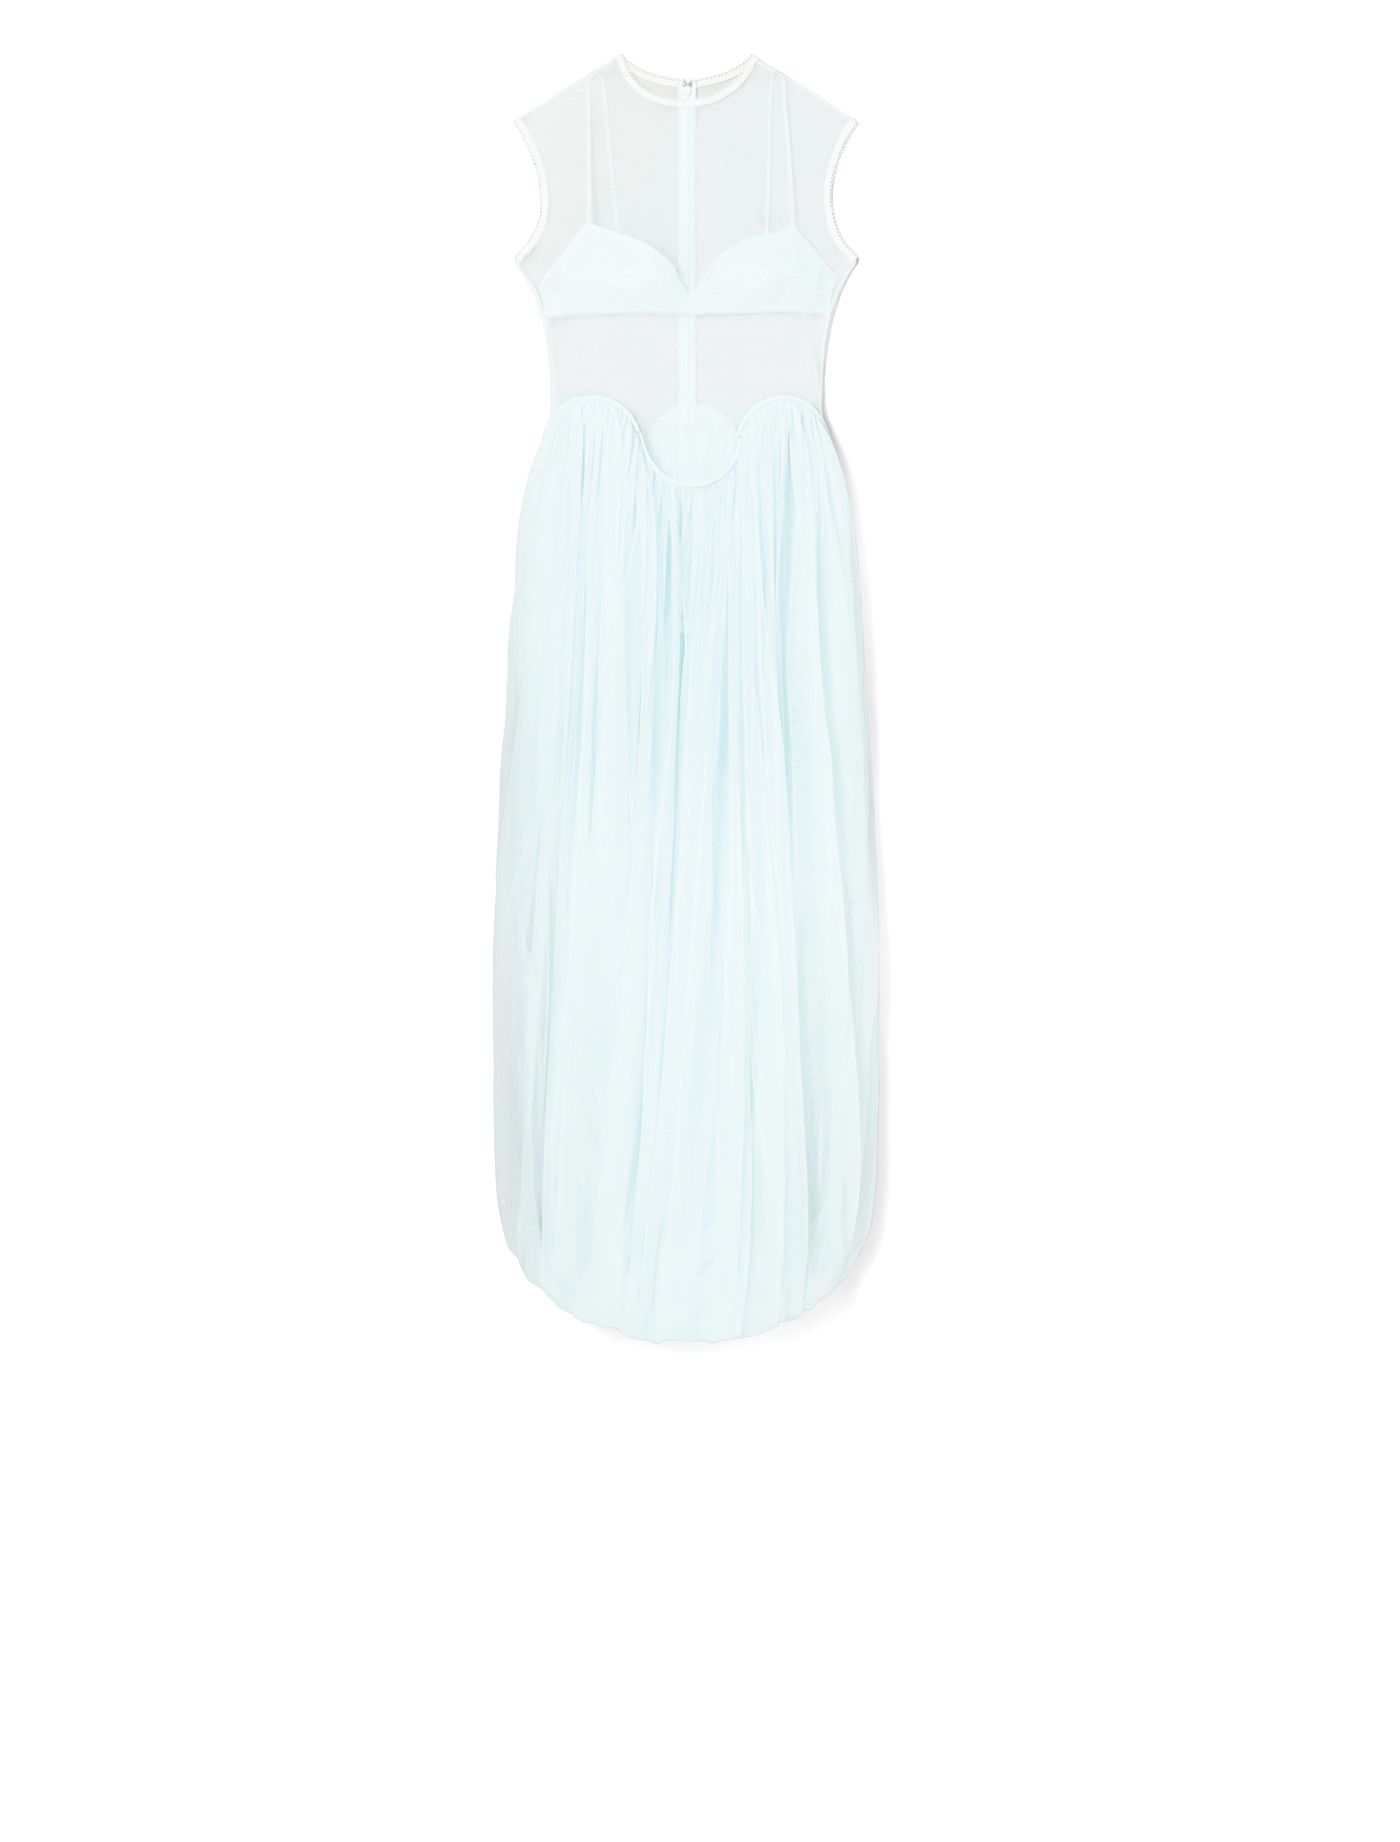 32 Tory Burch, Draped Tulle Dress In Iced Sky, Toryburch.com